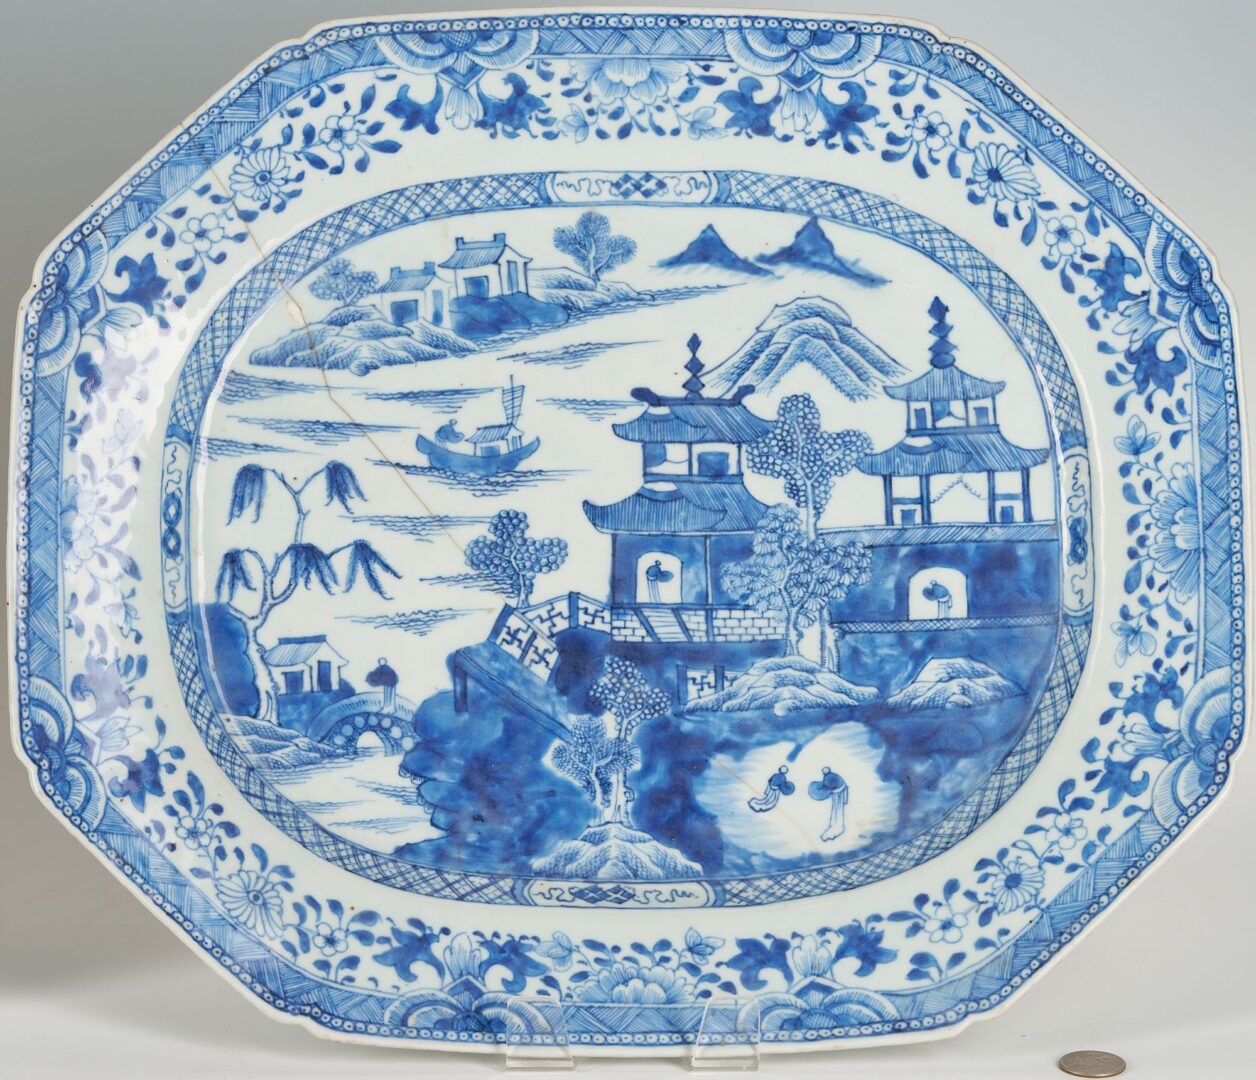 Lot 6: Pair of Chinese Export Porcelain Platters